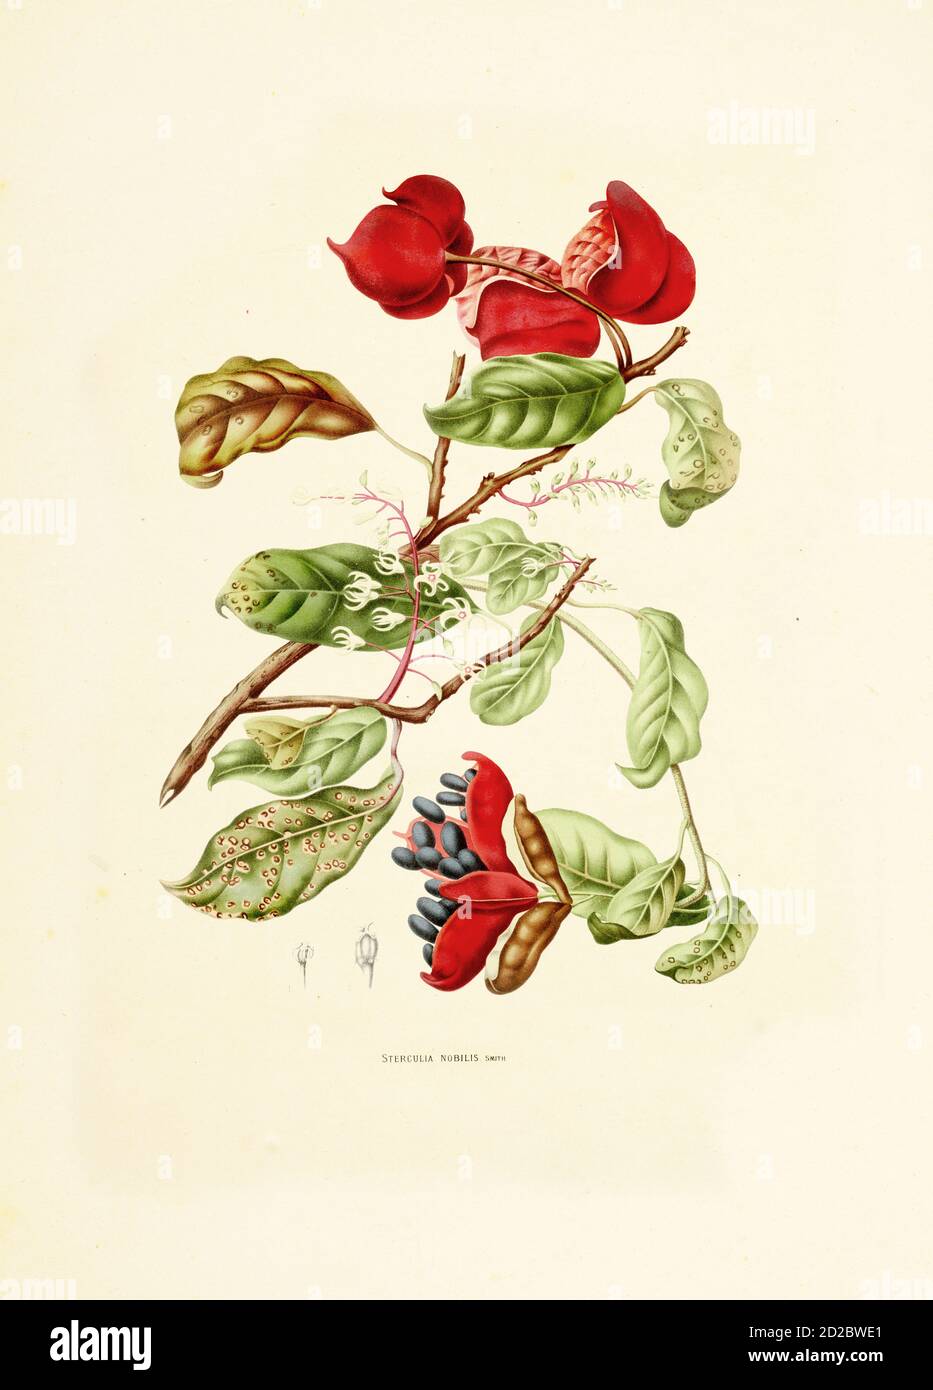 Antique illustration of a sterculia balanghas (also known as sterculia nobilis, noble bottle-tree or tropical chestnut). Engraving by Berthe Hoola van Stock Photo